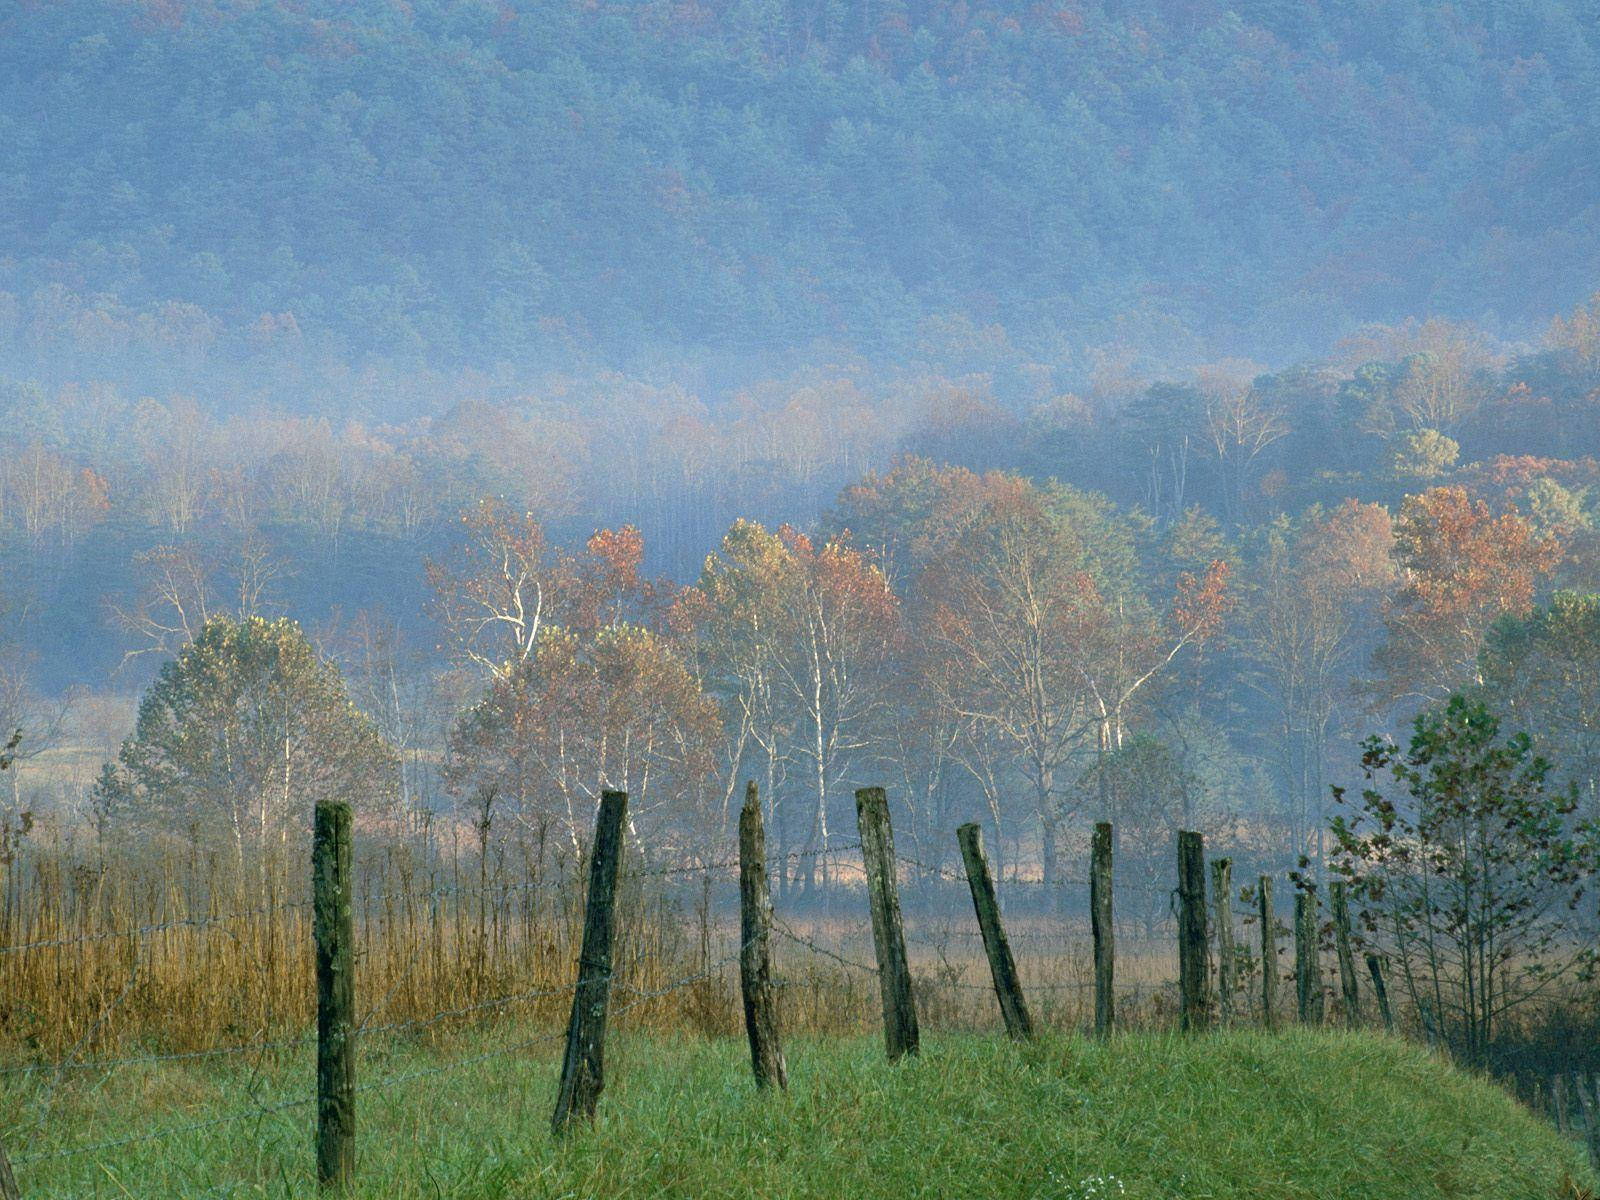 Wooden Fences Within The Great Smoky Mountains Wallpaper